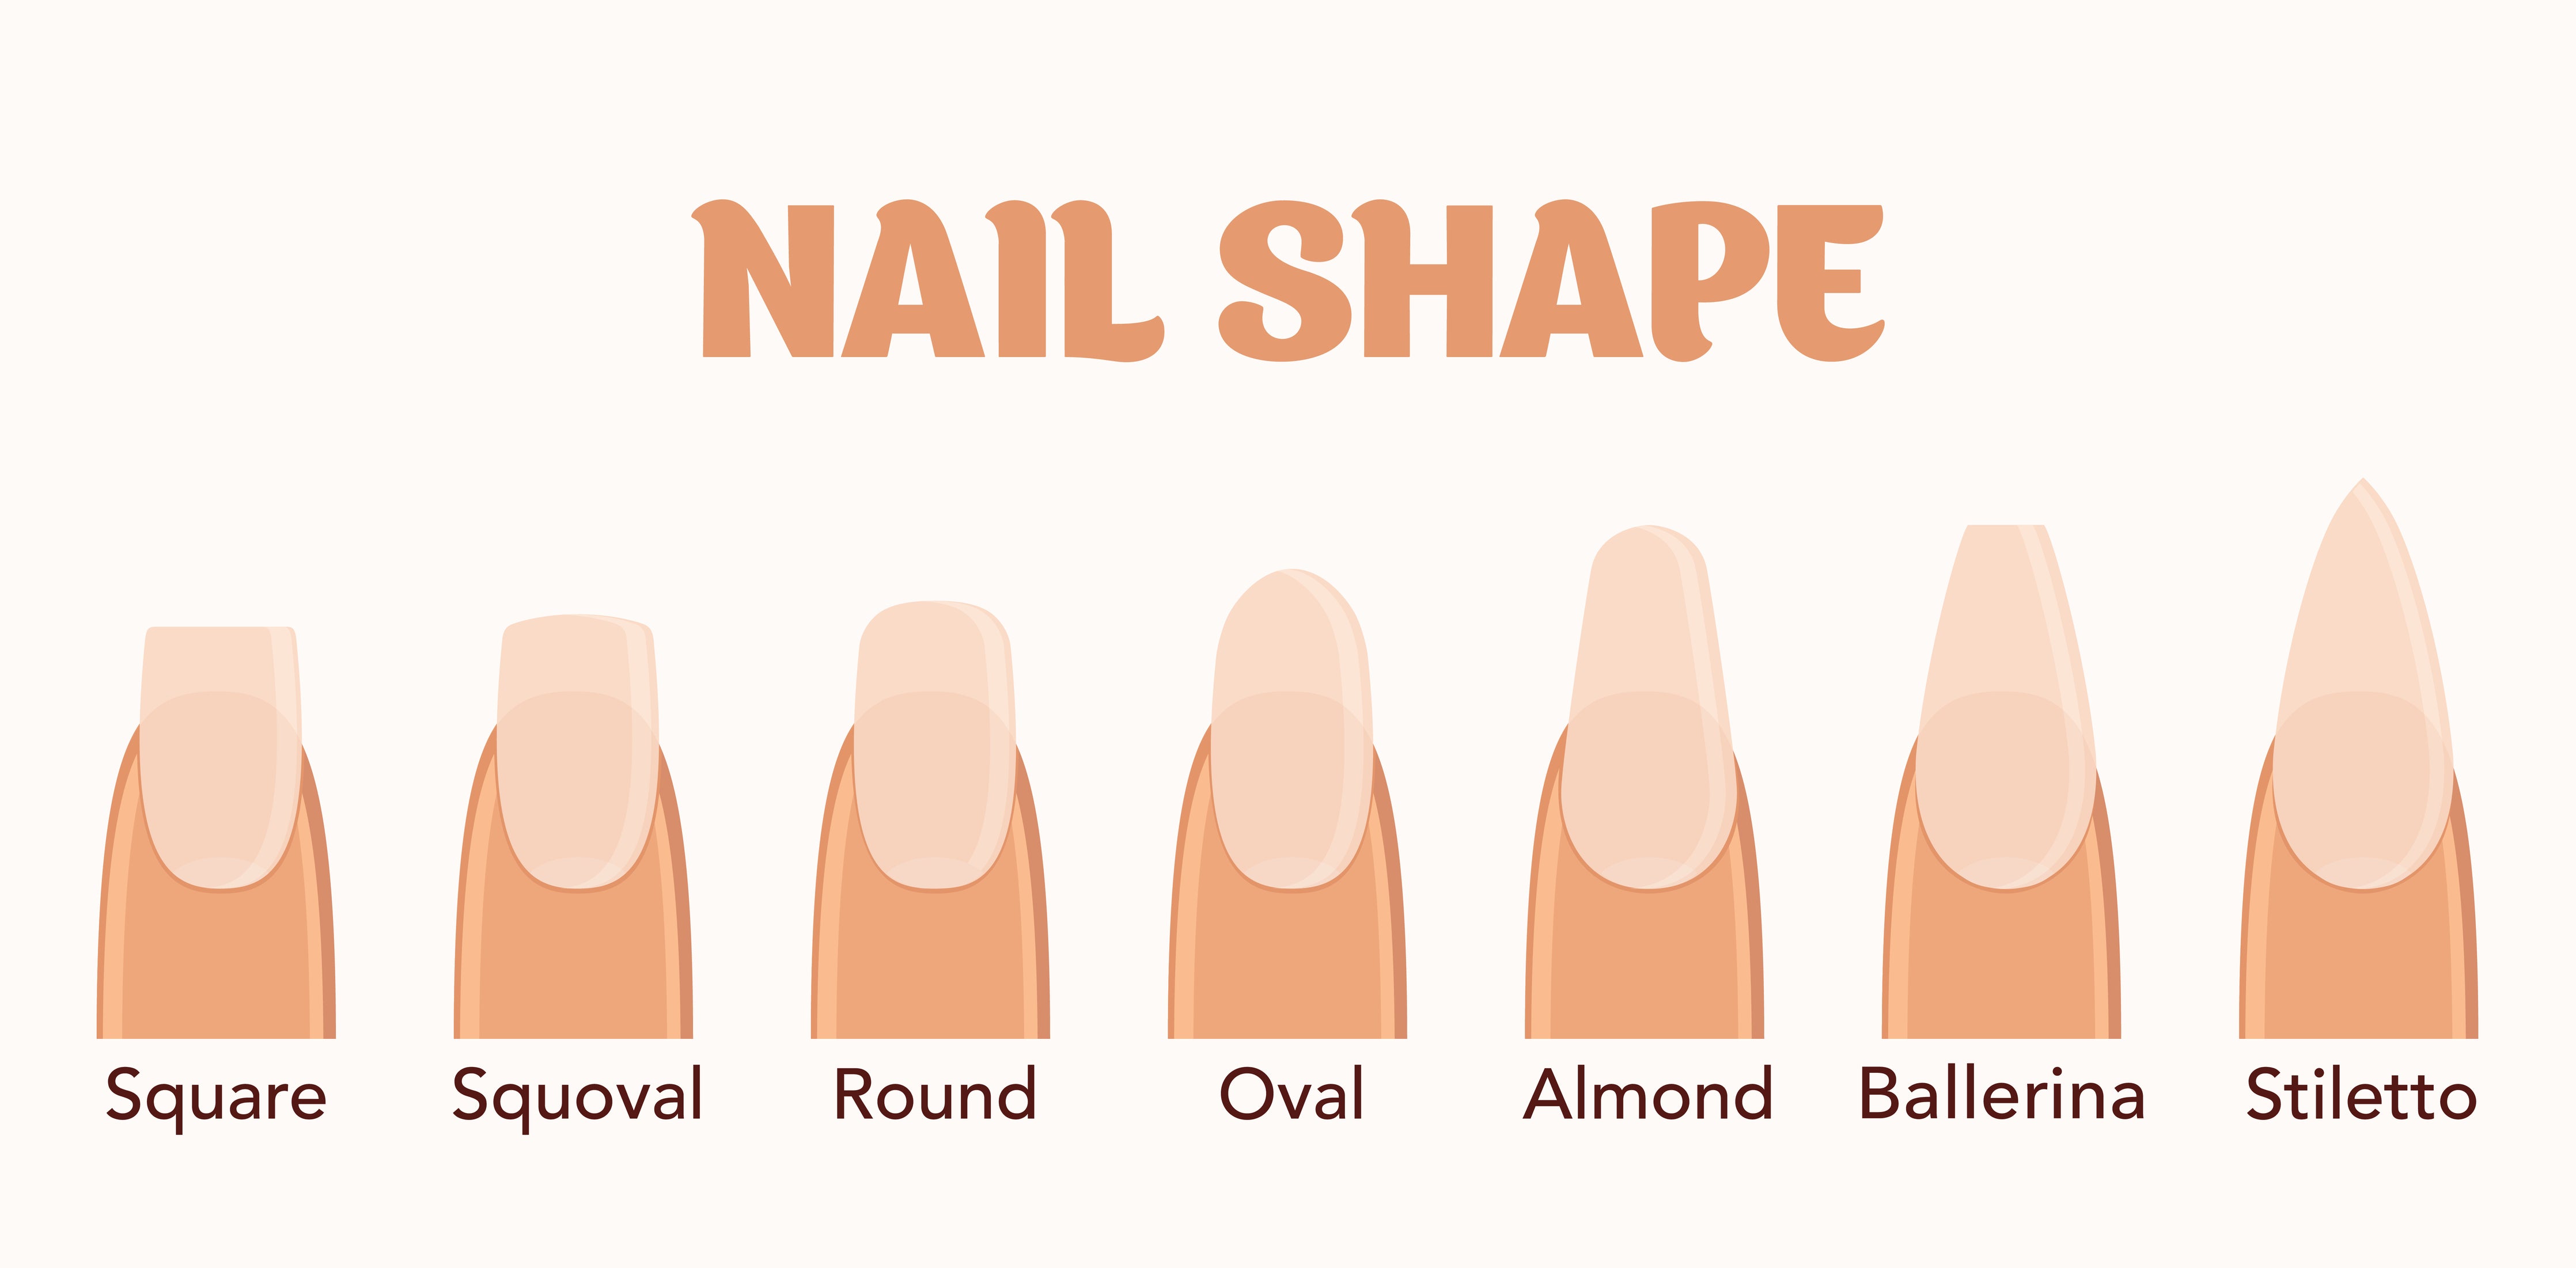 Almond Shape Nails vs. Stiletto Nails: What's the Difference? - wide 2